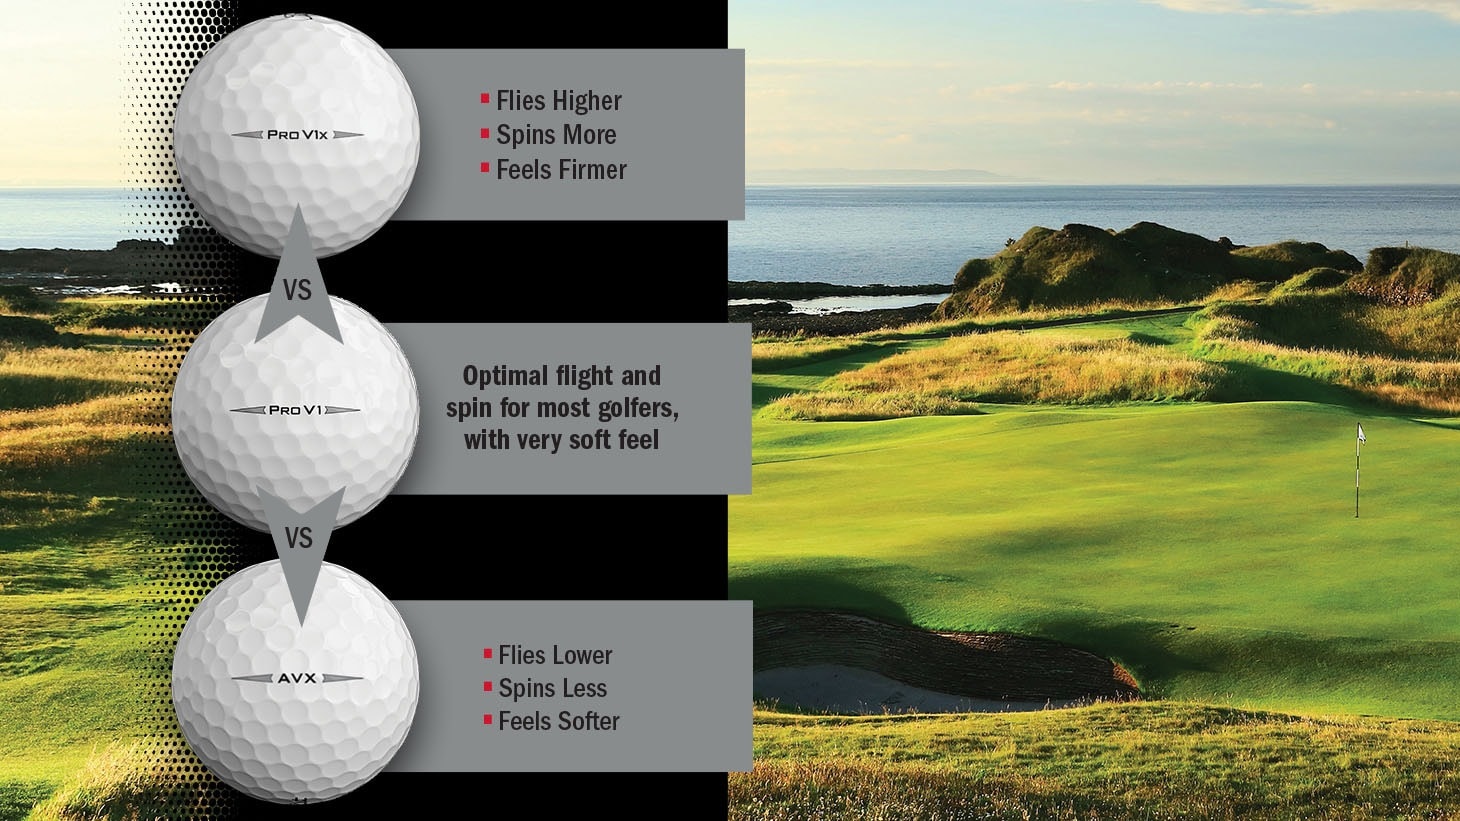 How Do Golf Ball Attributes Differ for Different Swing Speeds? 